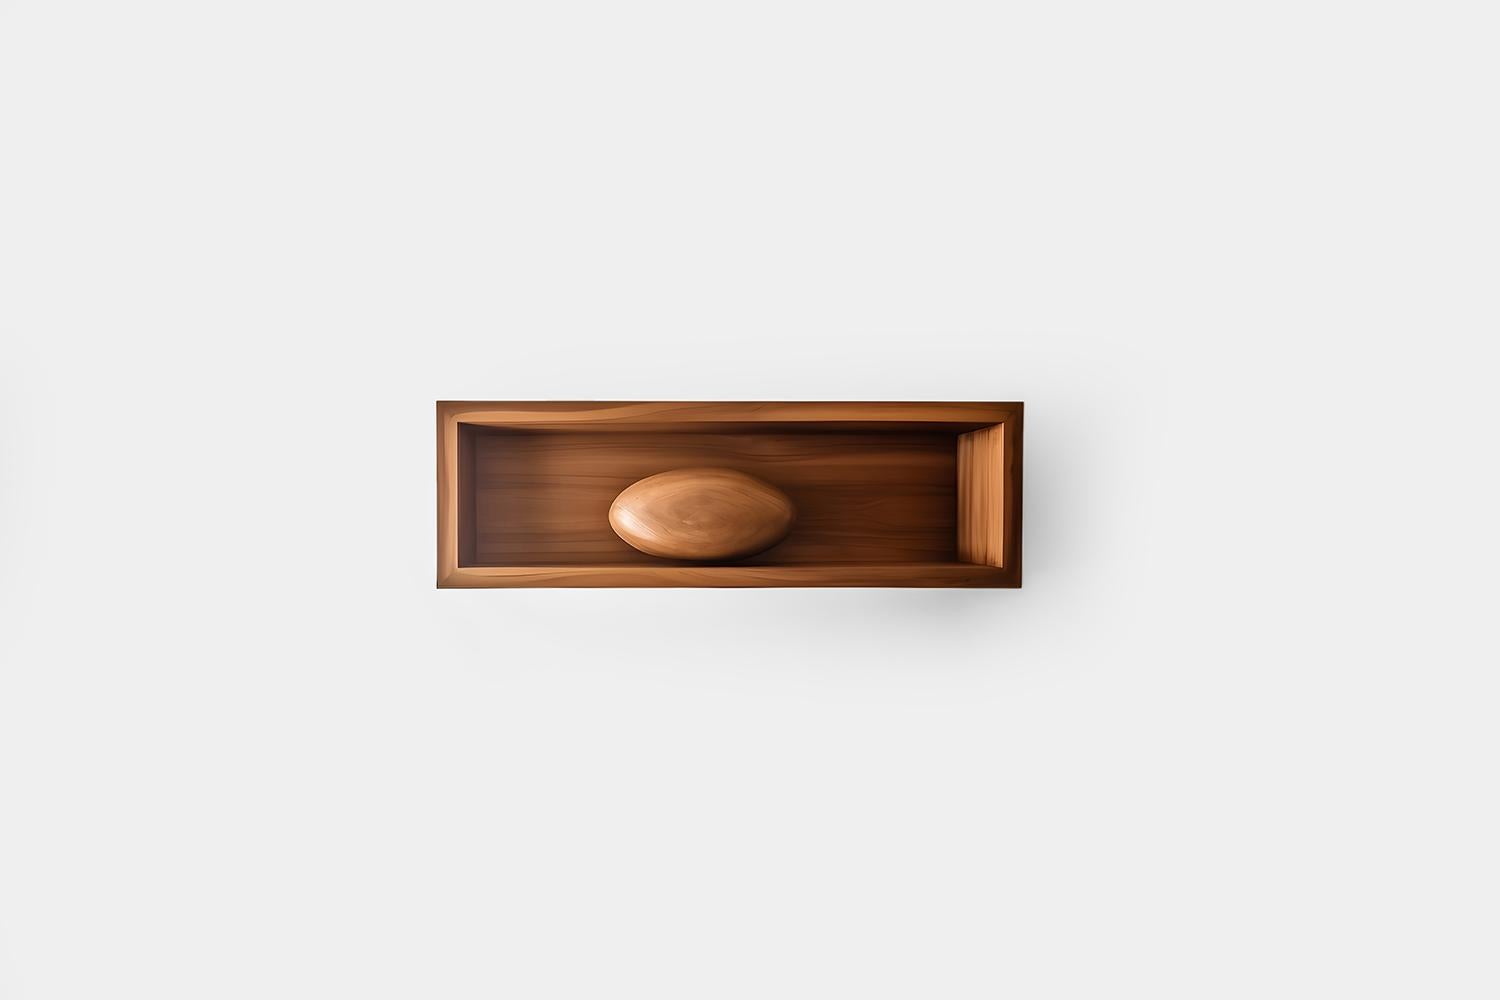 Rectangular Floating Shelf with Close Back and One Large Sculptural Wooden Pebble Accent, Sereno by Joel Escalona

—

What happens when the practical becomes art?
What happens when ornamentation gains significance?

Those were the questions